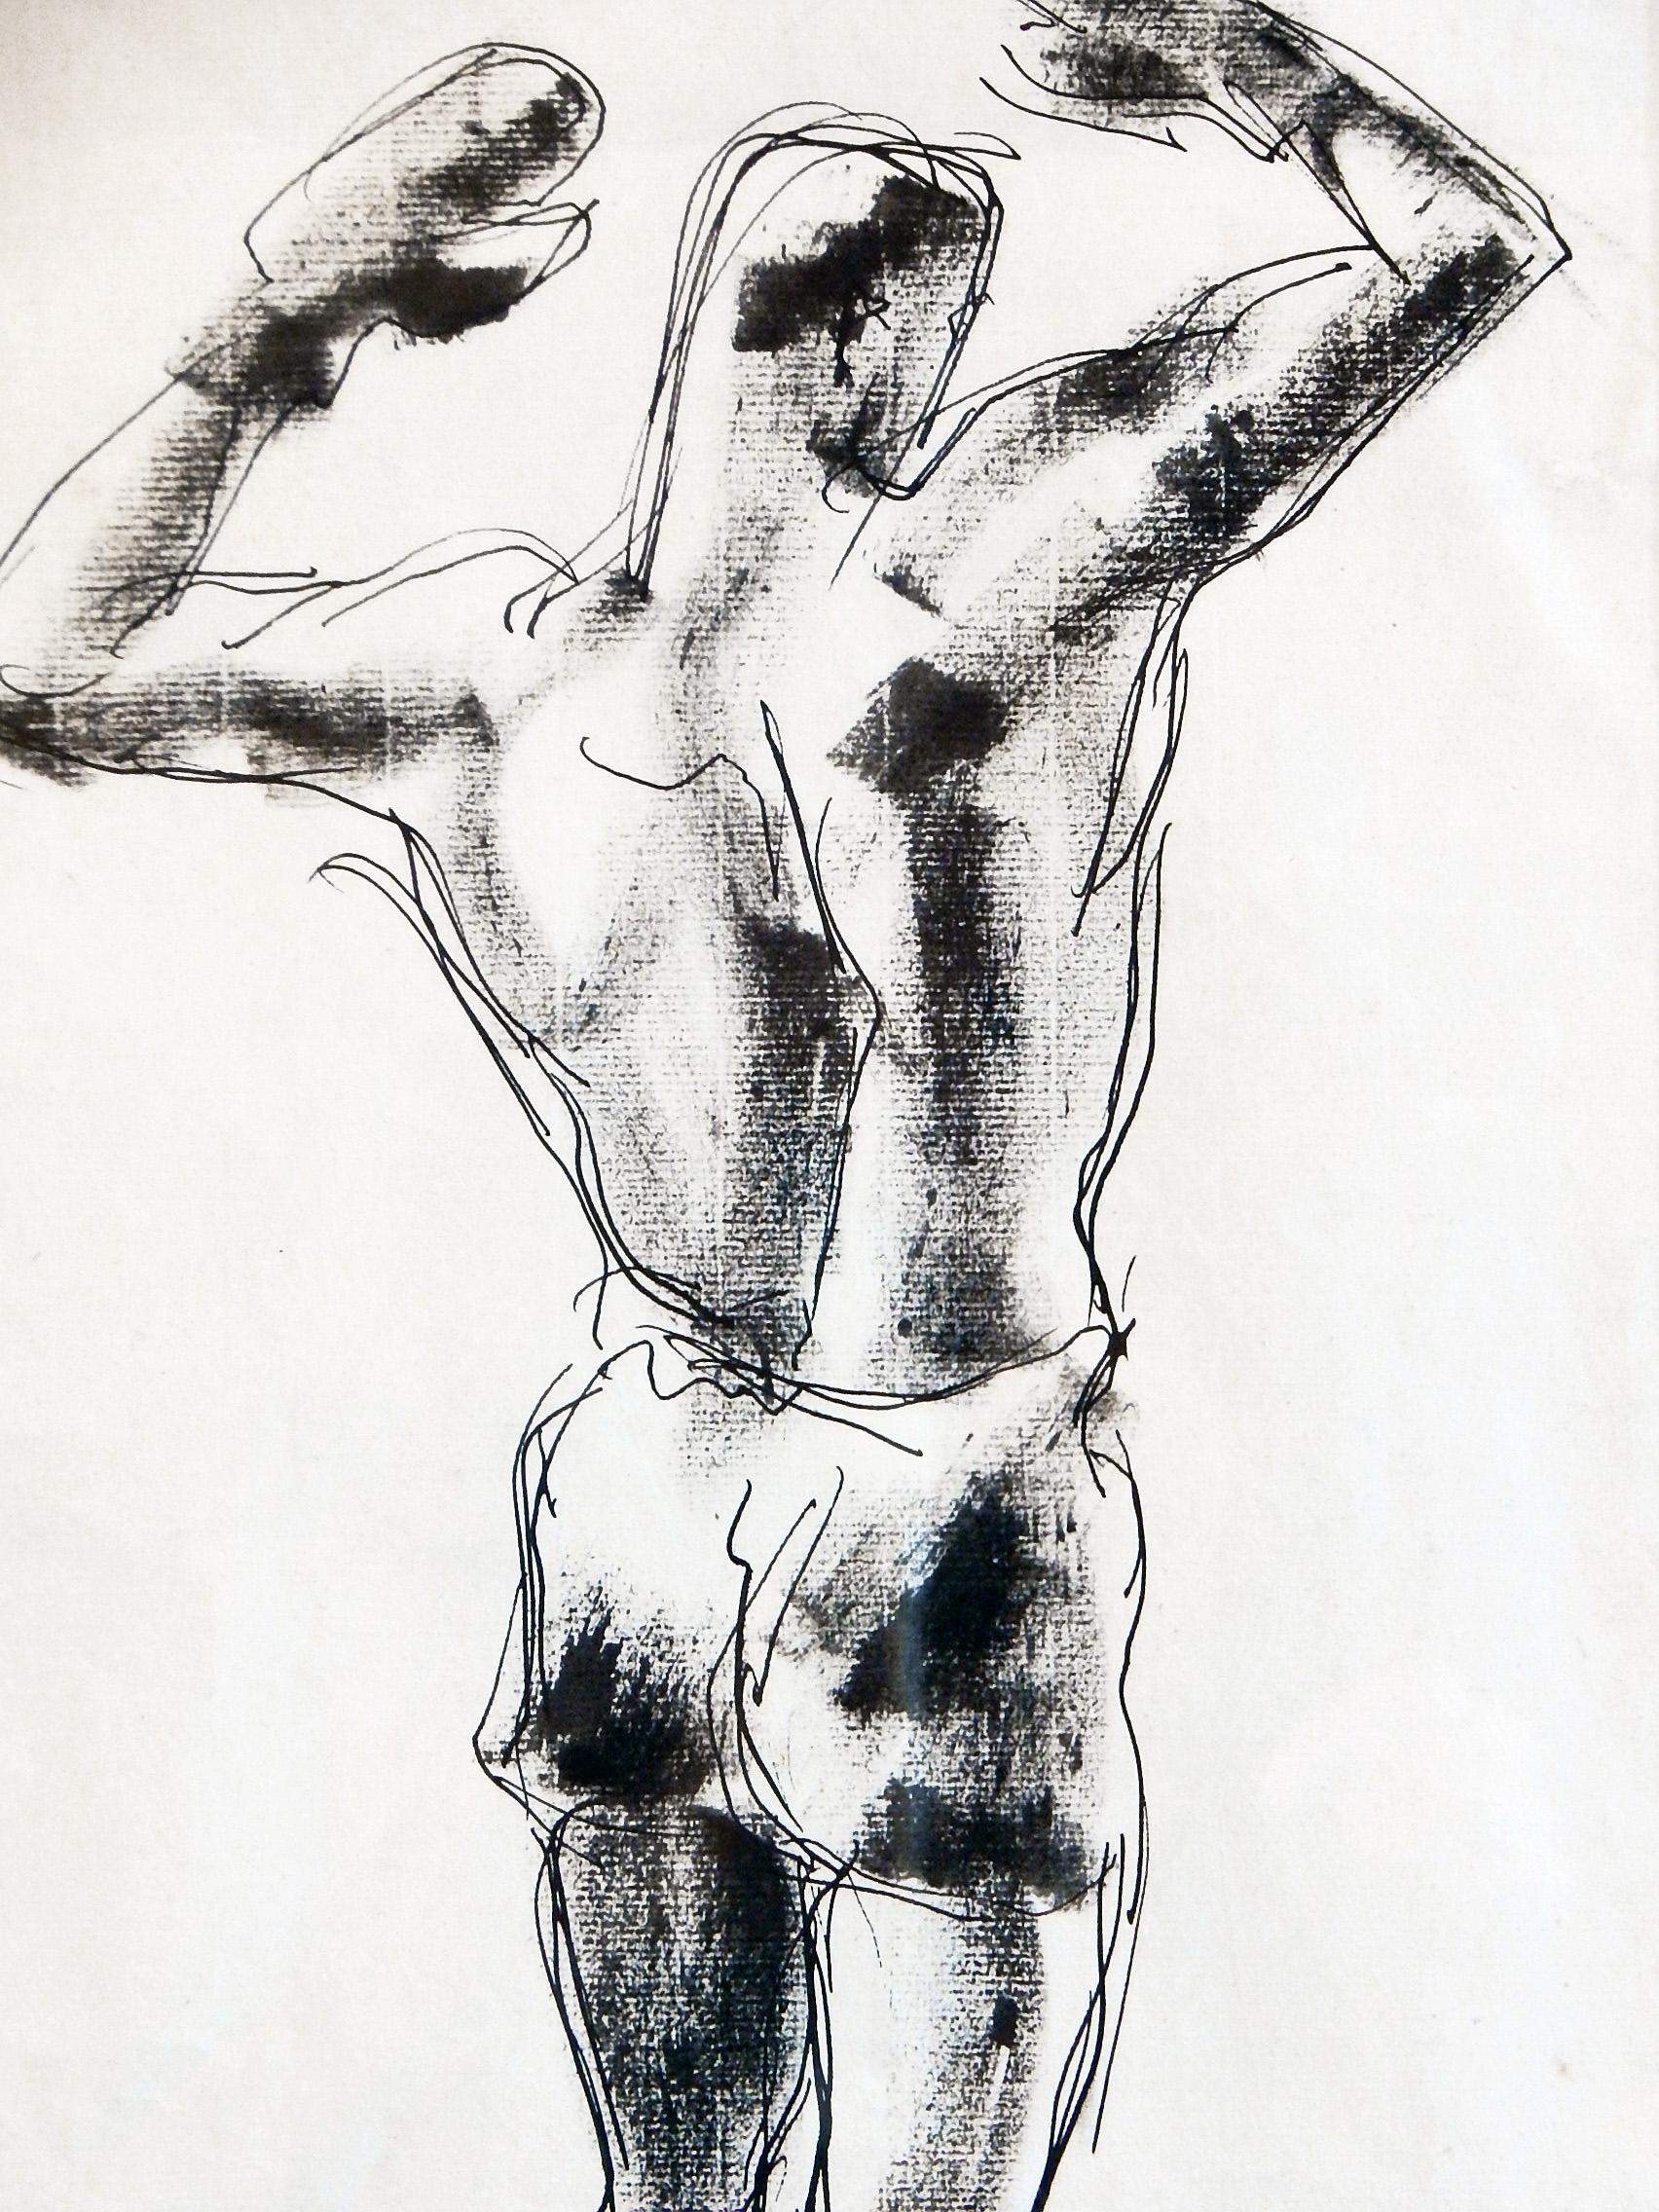 This 1929 vintage ink and inkwash drawing of a bare-chested boxer is turned away from the viewer, his gloved hands raised high as if the fight has just been won. The artist, William Littlefield, was fascinated by the male figure and produced many